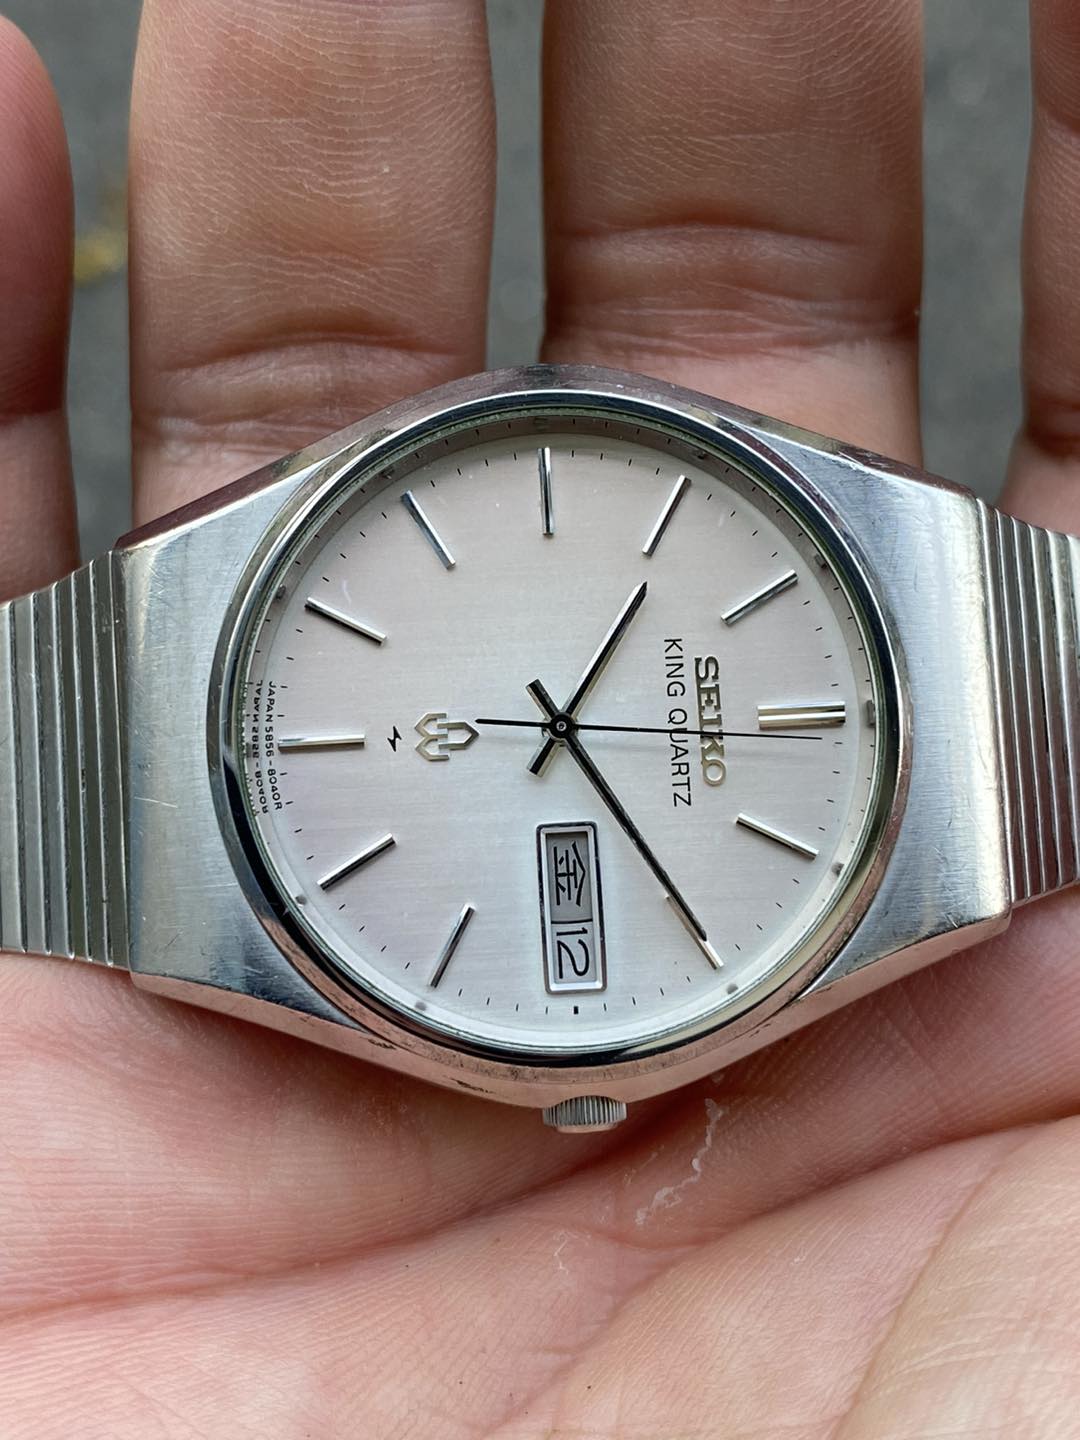 Seiko King Quartz 5856-8030, made in Japan – Long's Fine Watches